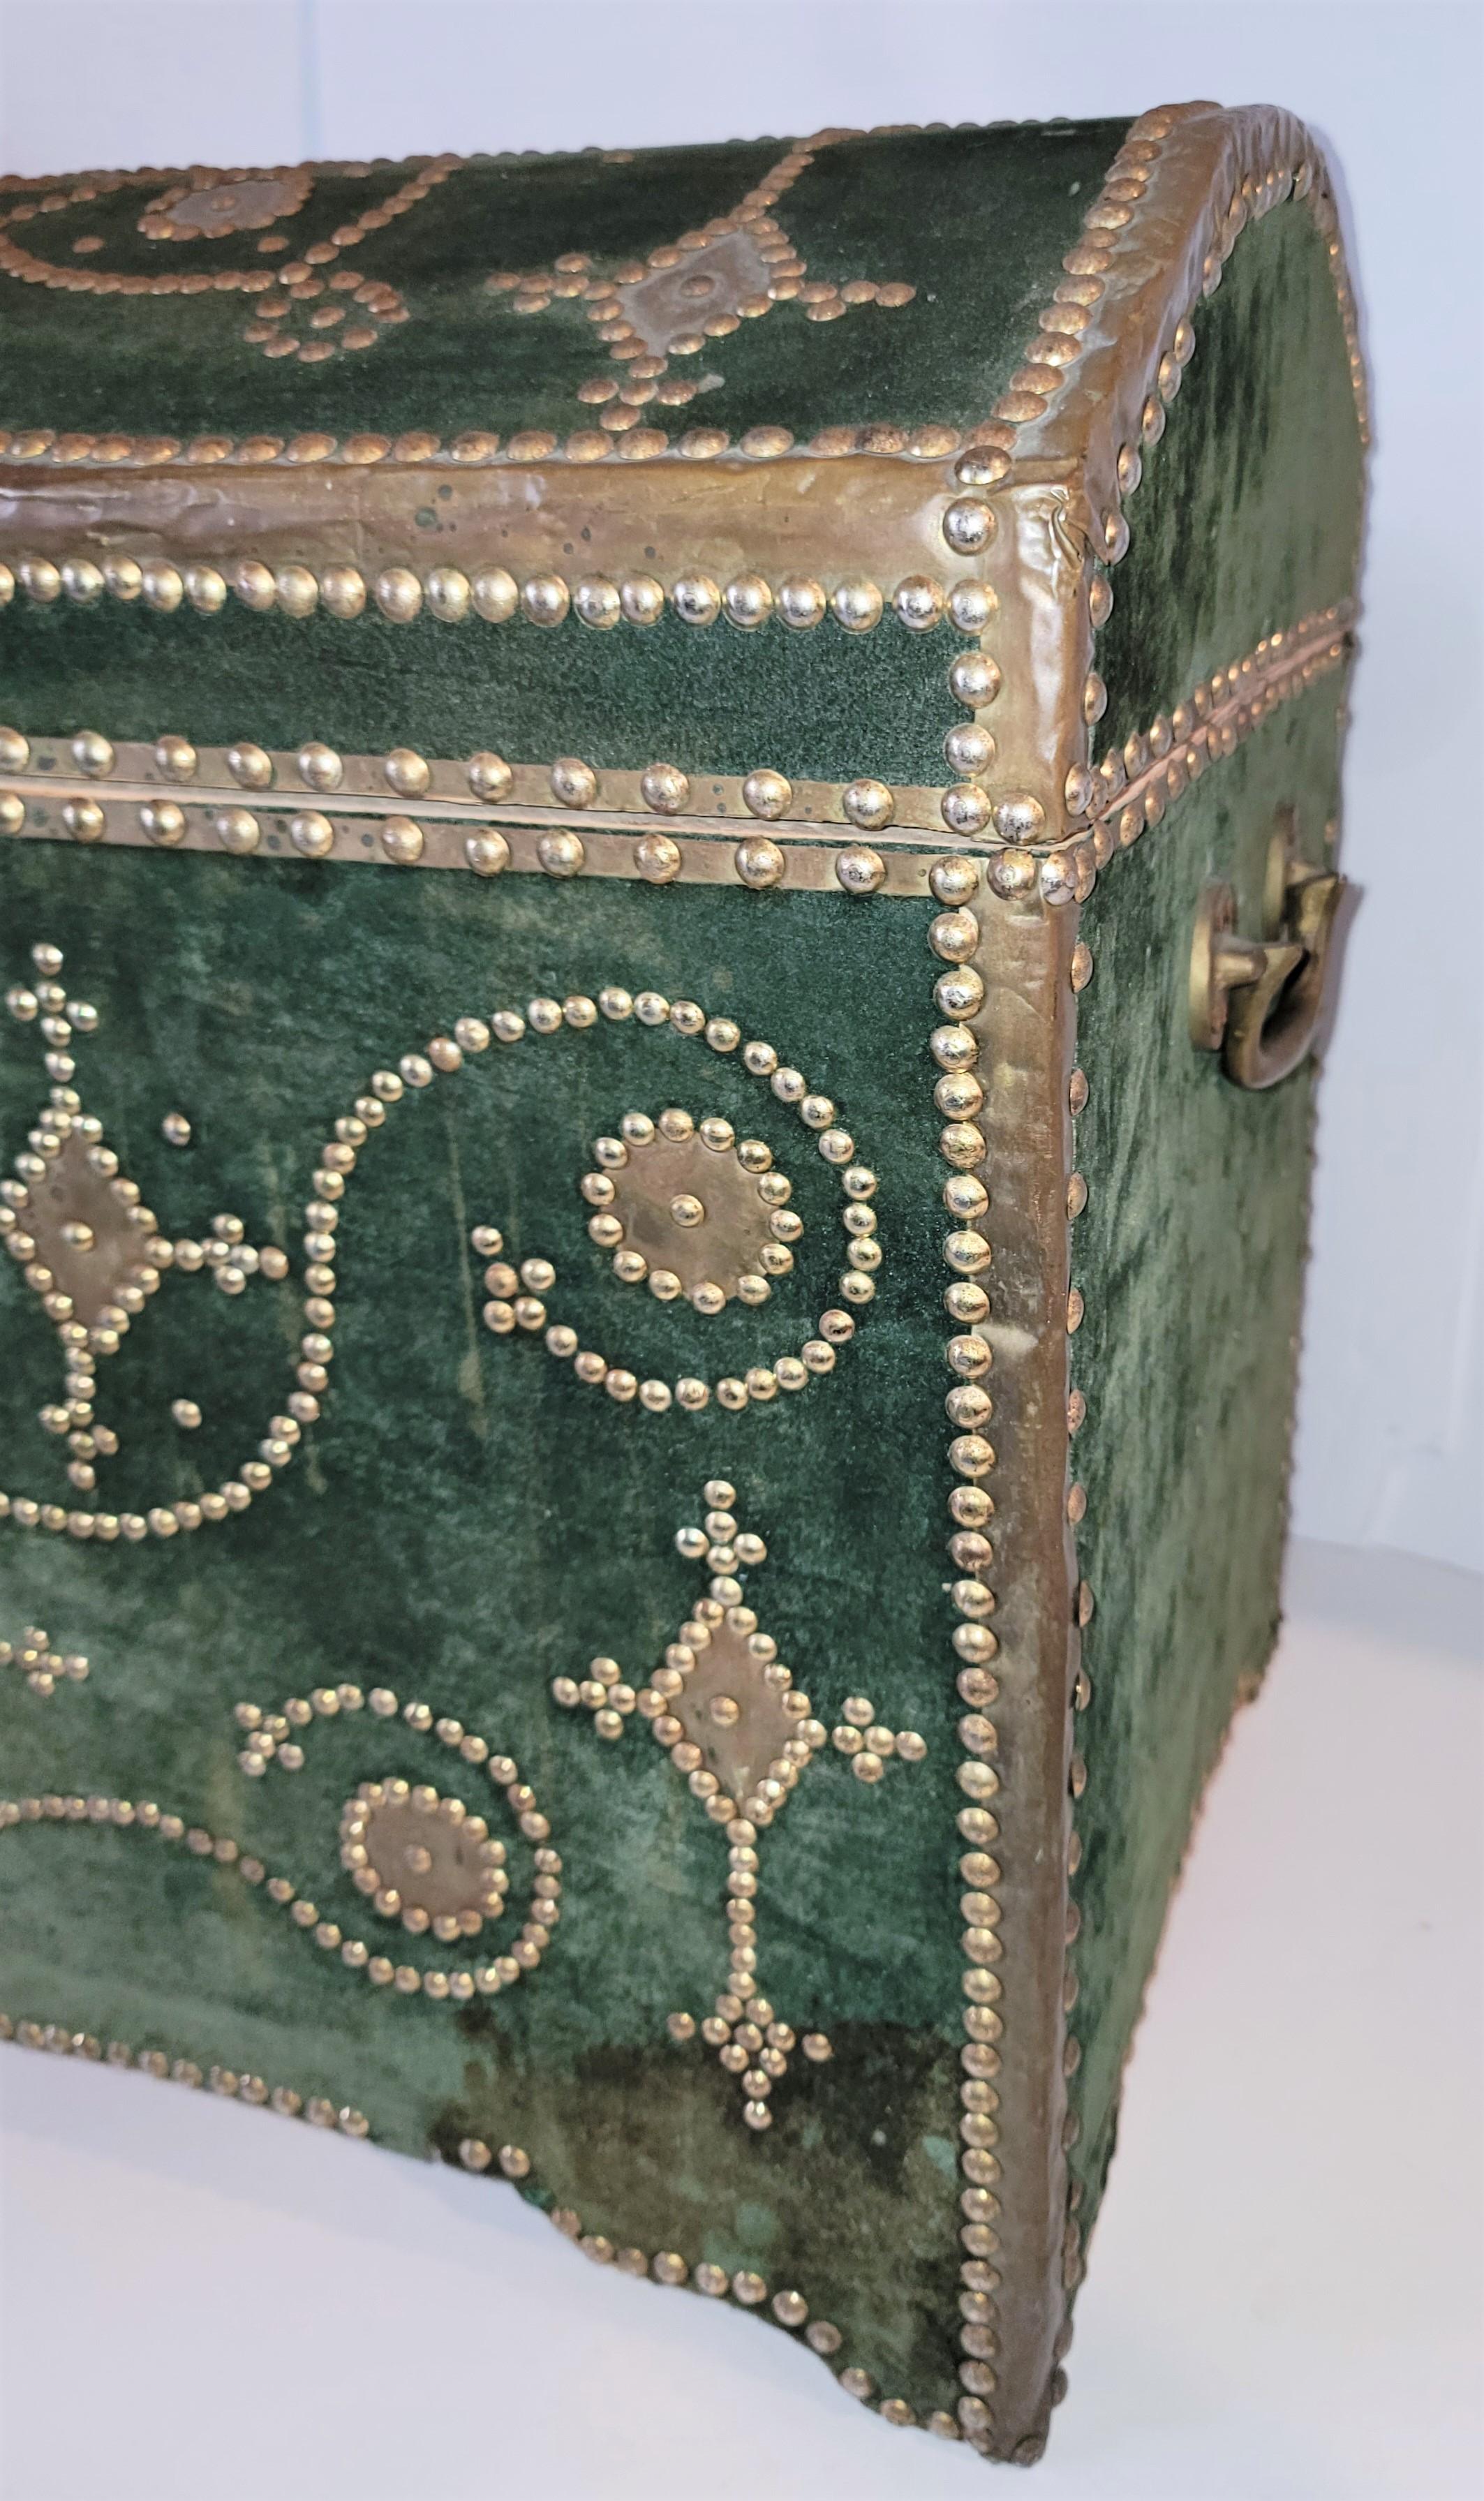 Hand-Crafted Beautiful Emerald Green Velvet Dome Top Trunk